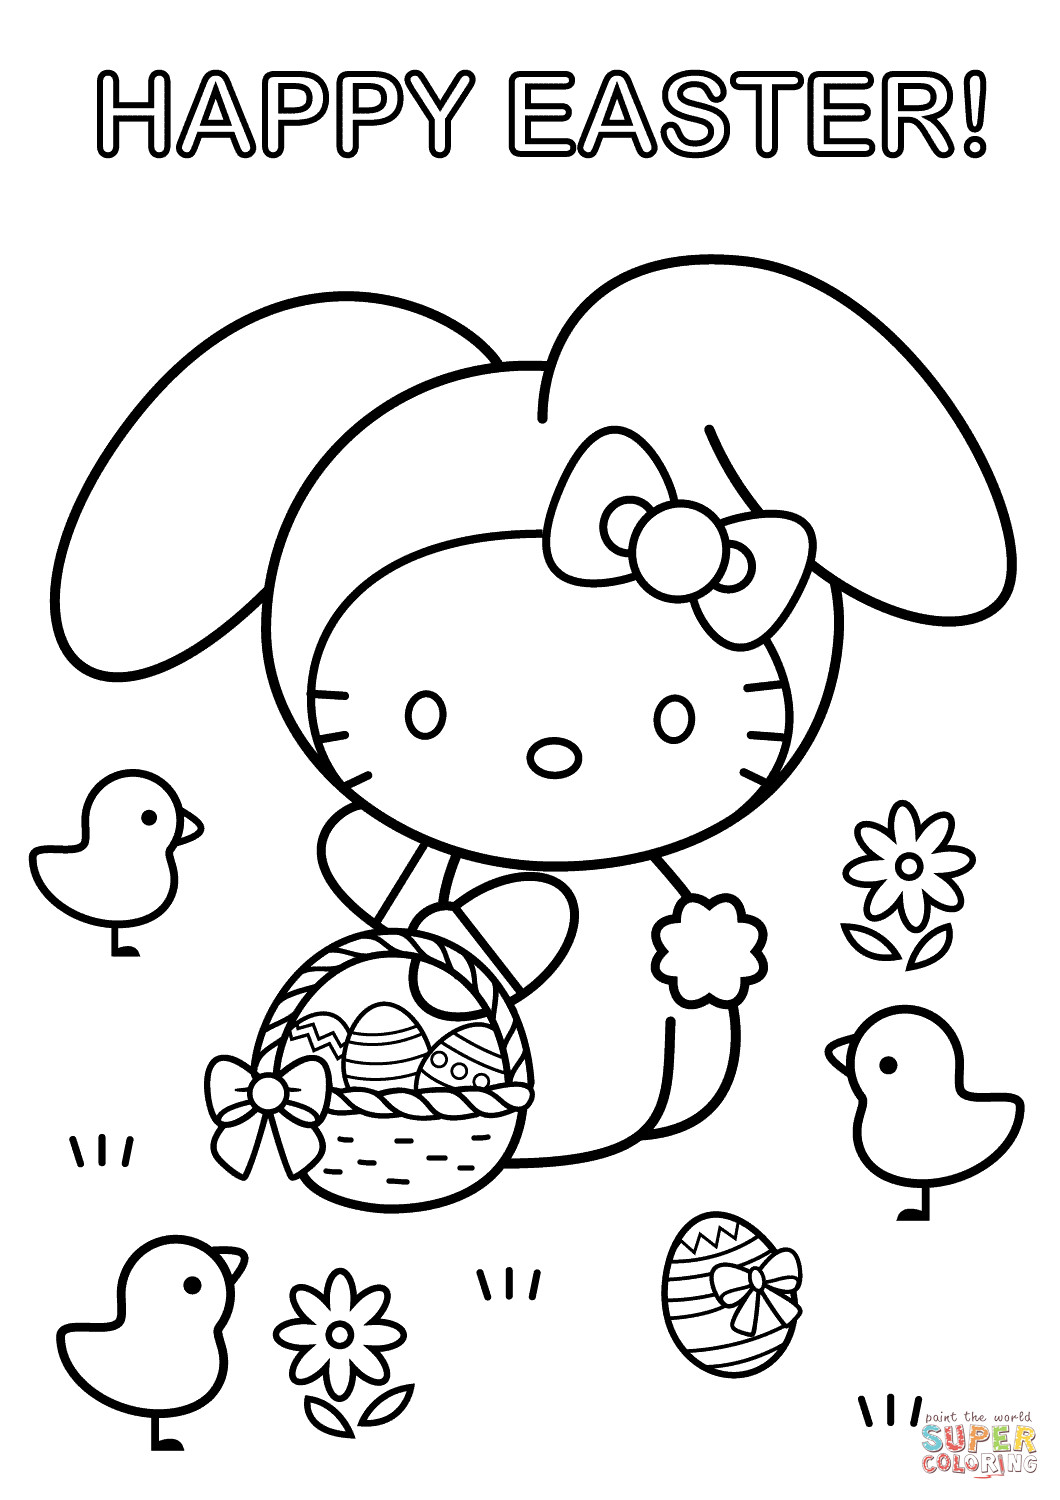 Free Printable Easter Coloring Sheets
 Hello Kitty Happy Easter coloring page